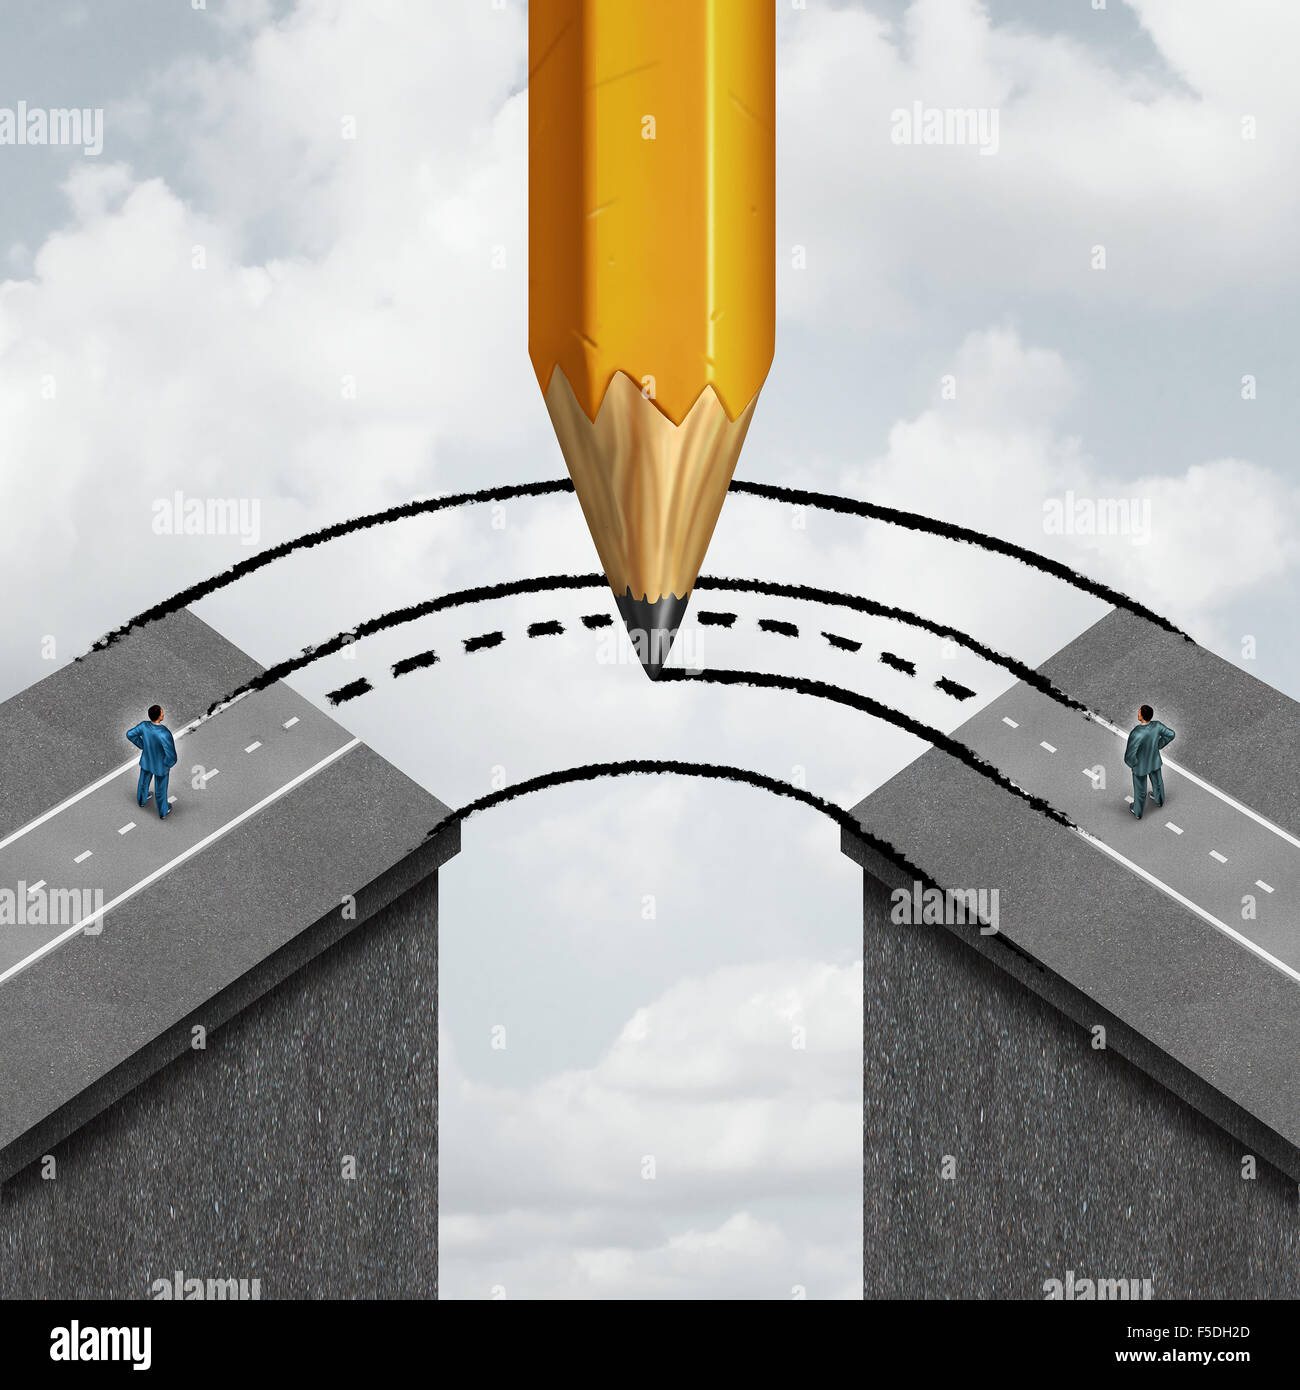 Bridging the gap business partnership concept as a giant pencil drawing a joining road to connect divided businessmen as a cooperation symbol of support and assistance to help in joining separate partners. Stock Photo